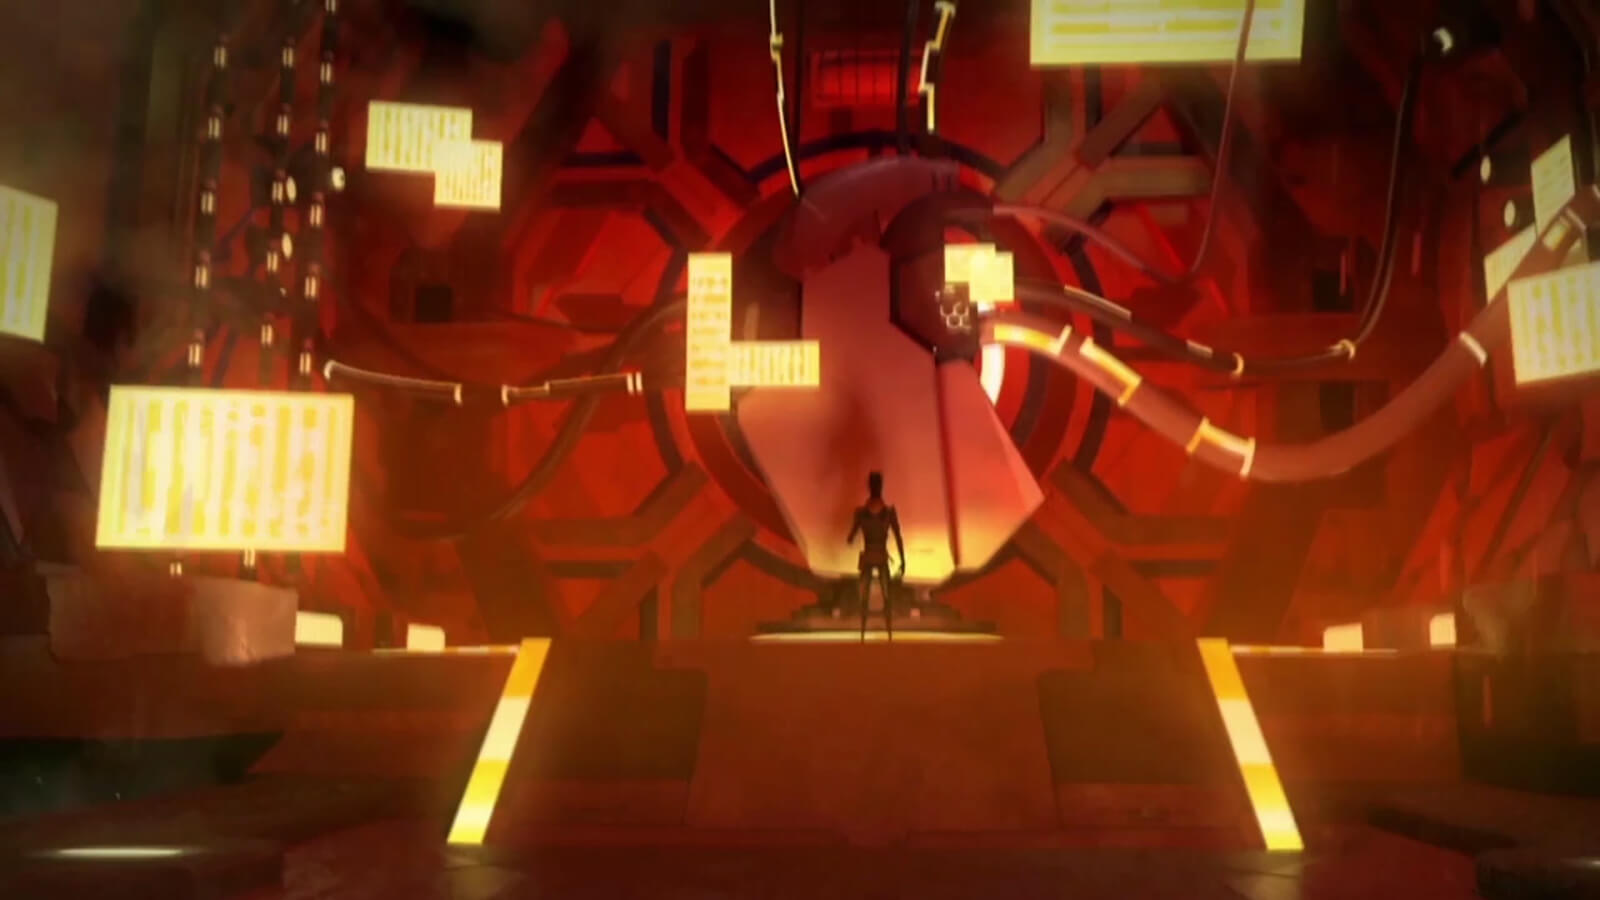 A man stands before a large machine connected to the wall by tubes. The room is tinged by red light and yellow accents.